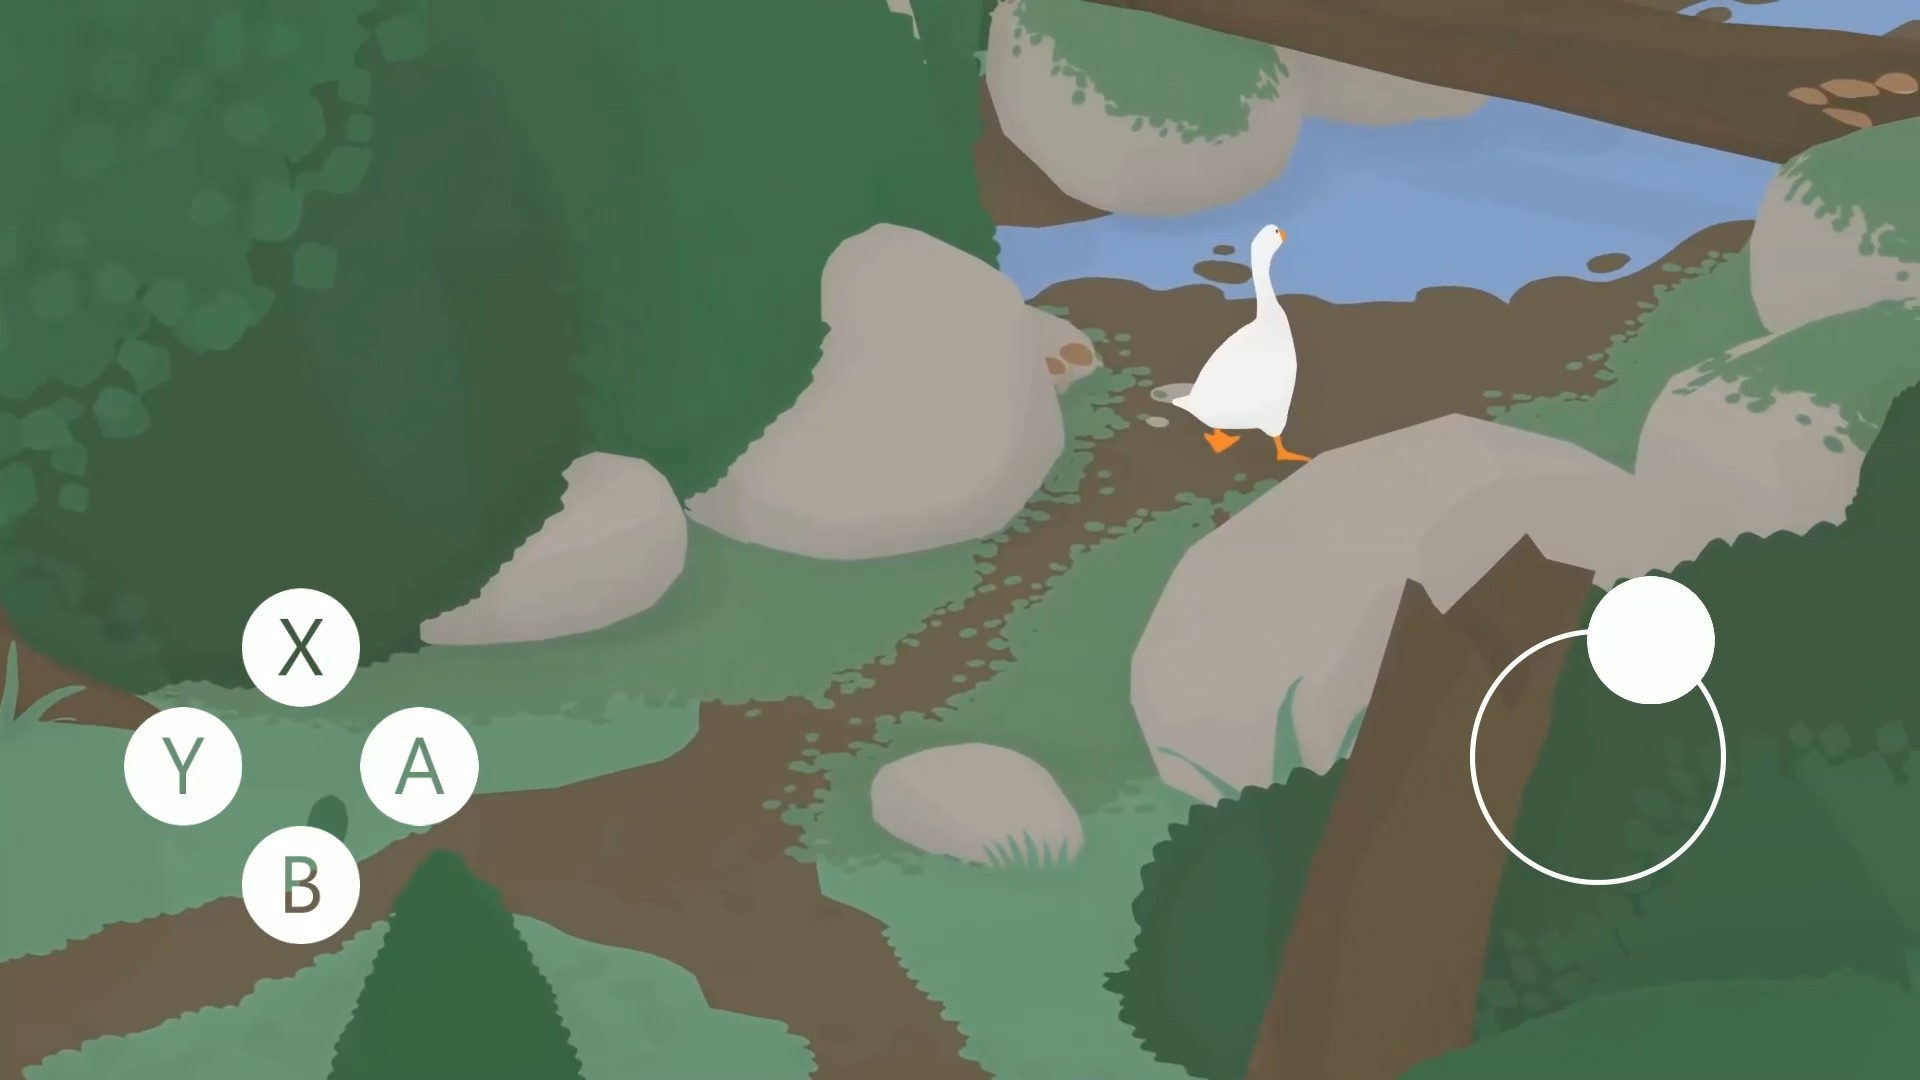 Untitled Goose Game 60-100FPS ON PHONES!